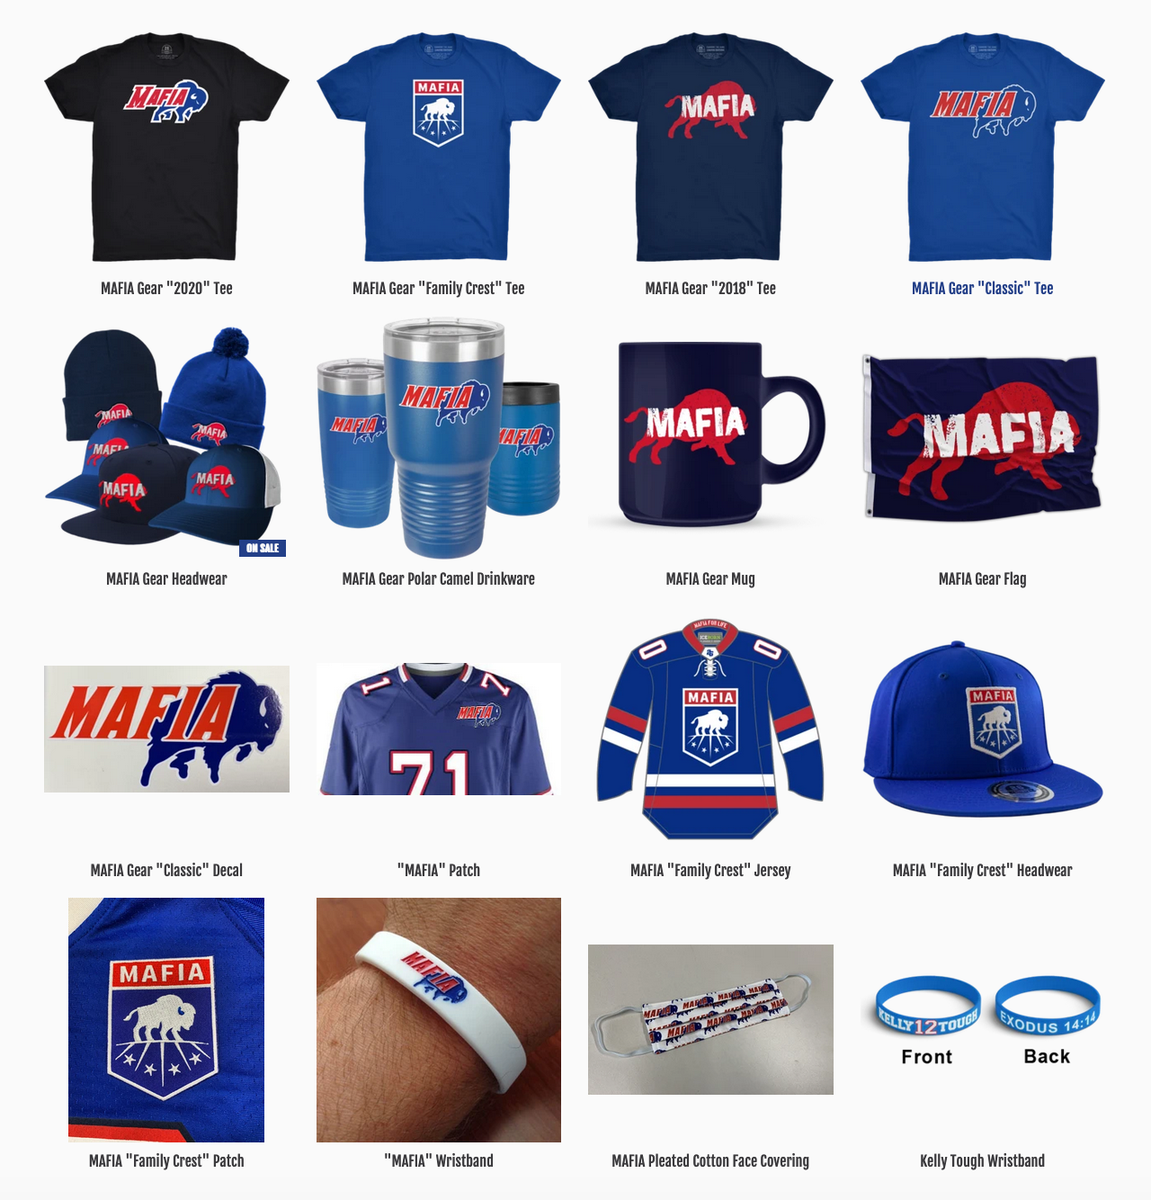 And lastly, we’ve got some new stuff available over at  http://26yw.co/mafia-gear   #BillsMafia